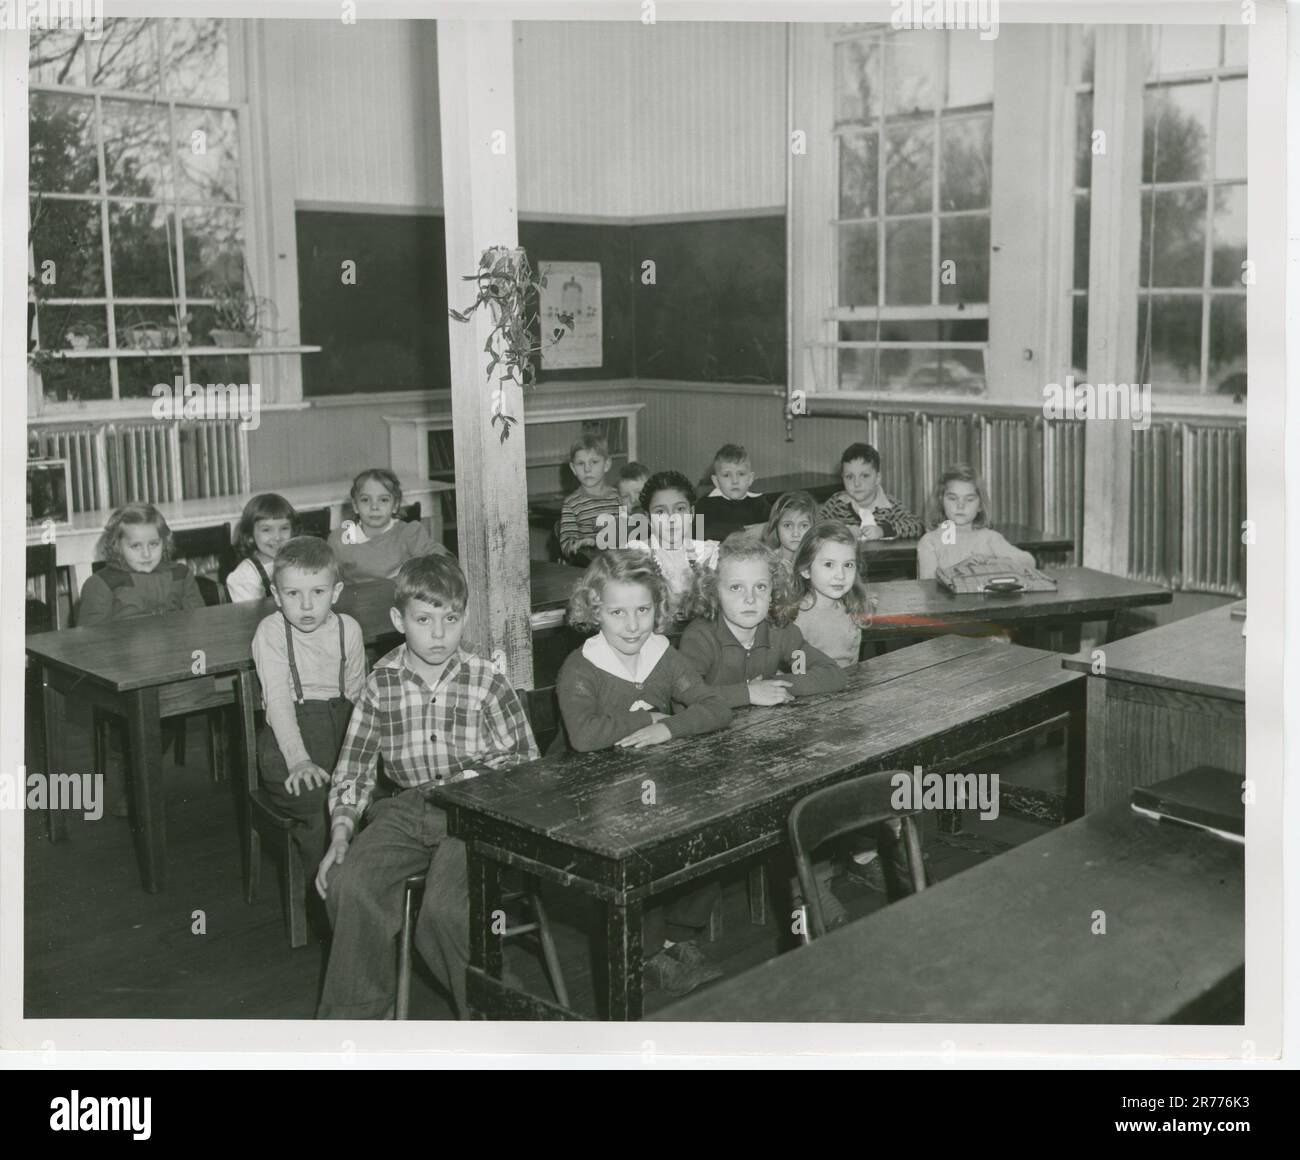 View of a Botetourt School Classroom; 1st Grade. This item is a photograph of a Botetourt School classroom for 1st grade; featuring students. This photograph was used as the Defendant's Exhibit No. 162 for the civil rights court case Alice Lorraine Ashley, et al. v. School Board of Gloucester Co. and J. Walter Kenny, Division Superintendent..  Mid Atlantic Region (Philadelphia, PA). Photographic Print. Stock Photo